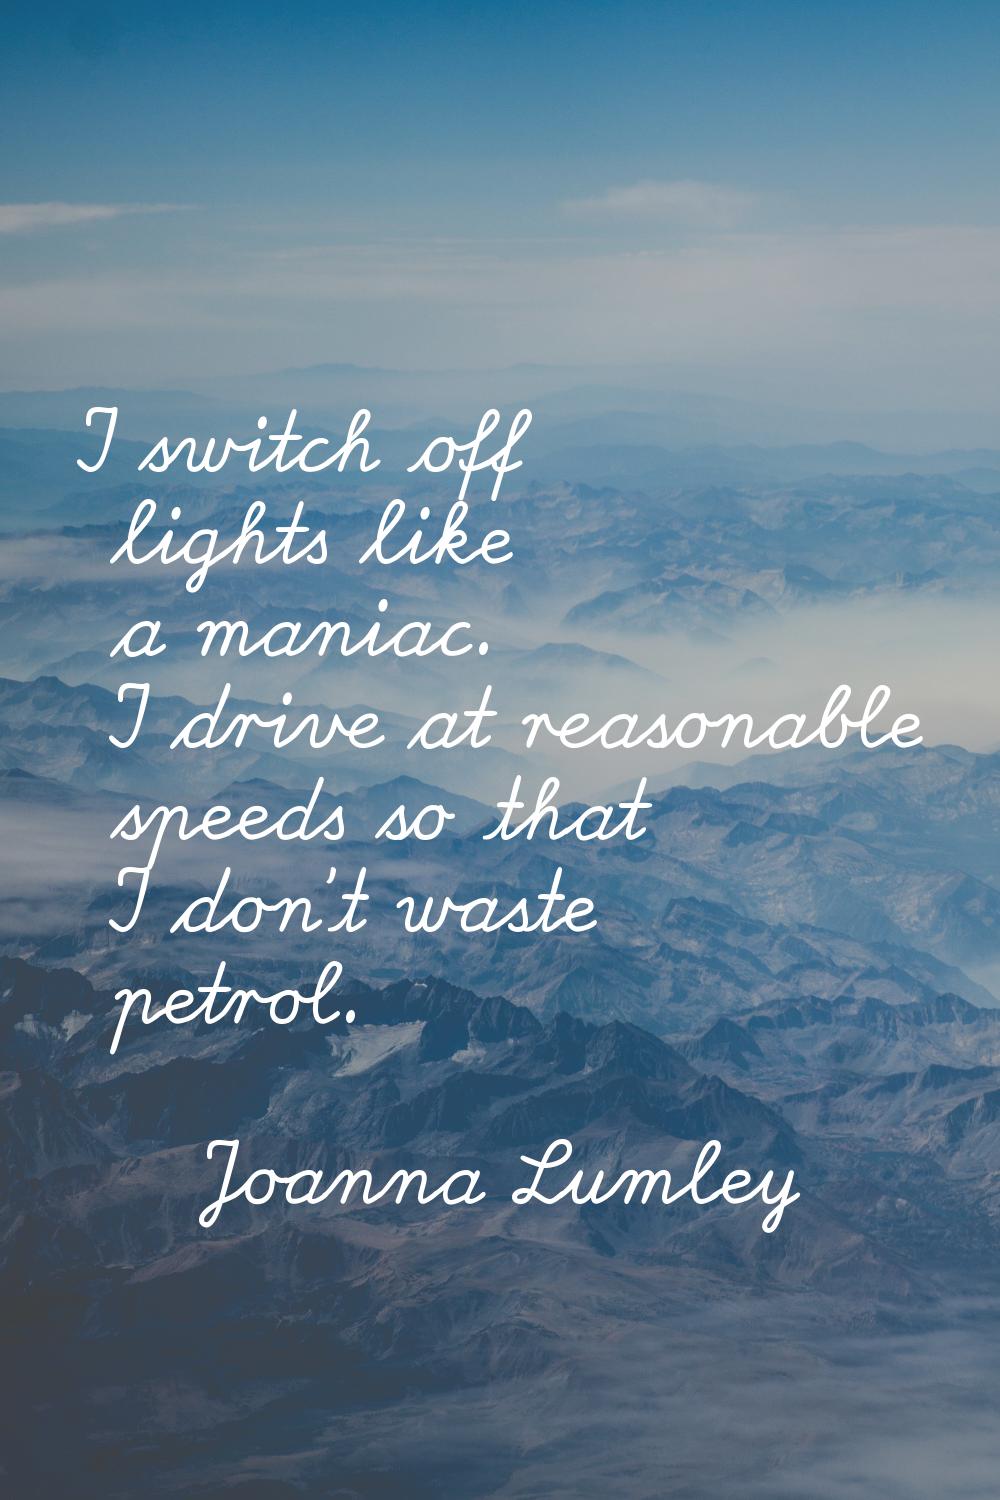 I switch off lights like a maniac. I drive at reasonable speeds so that I don't waste petrol.